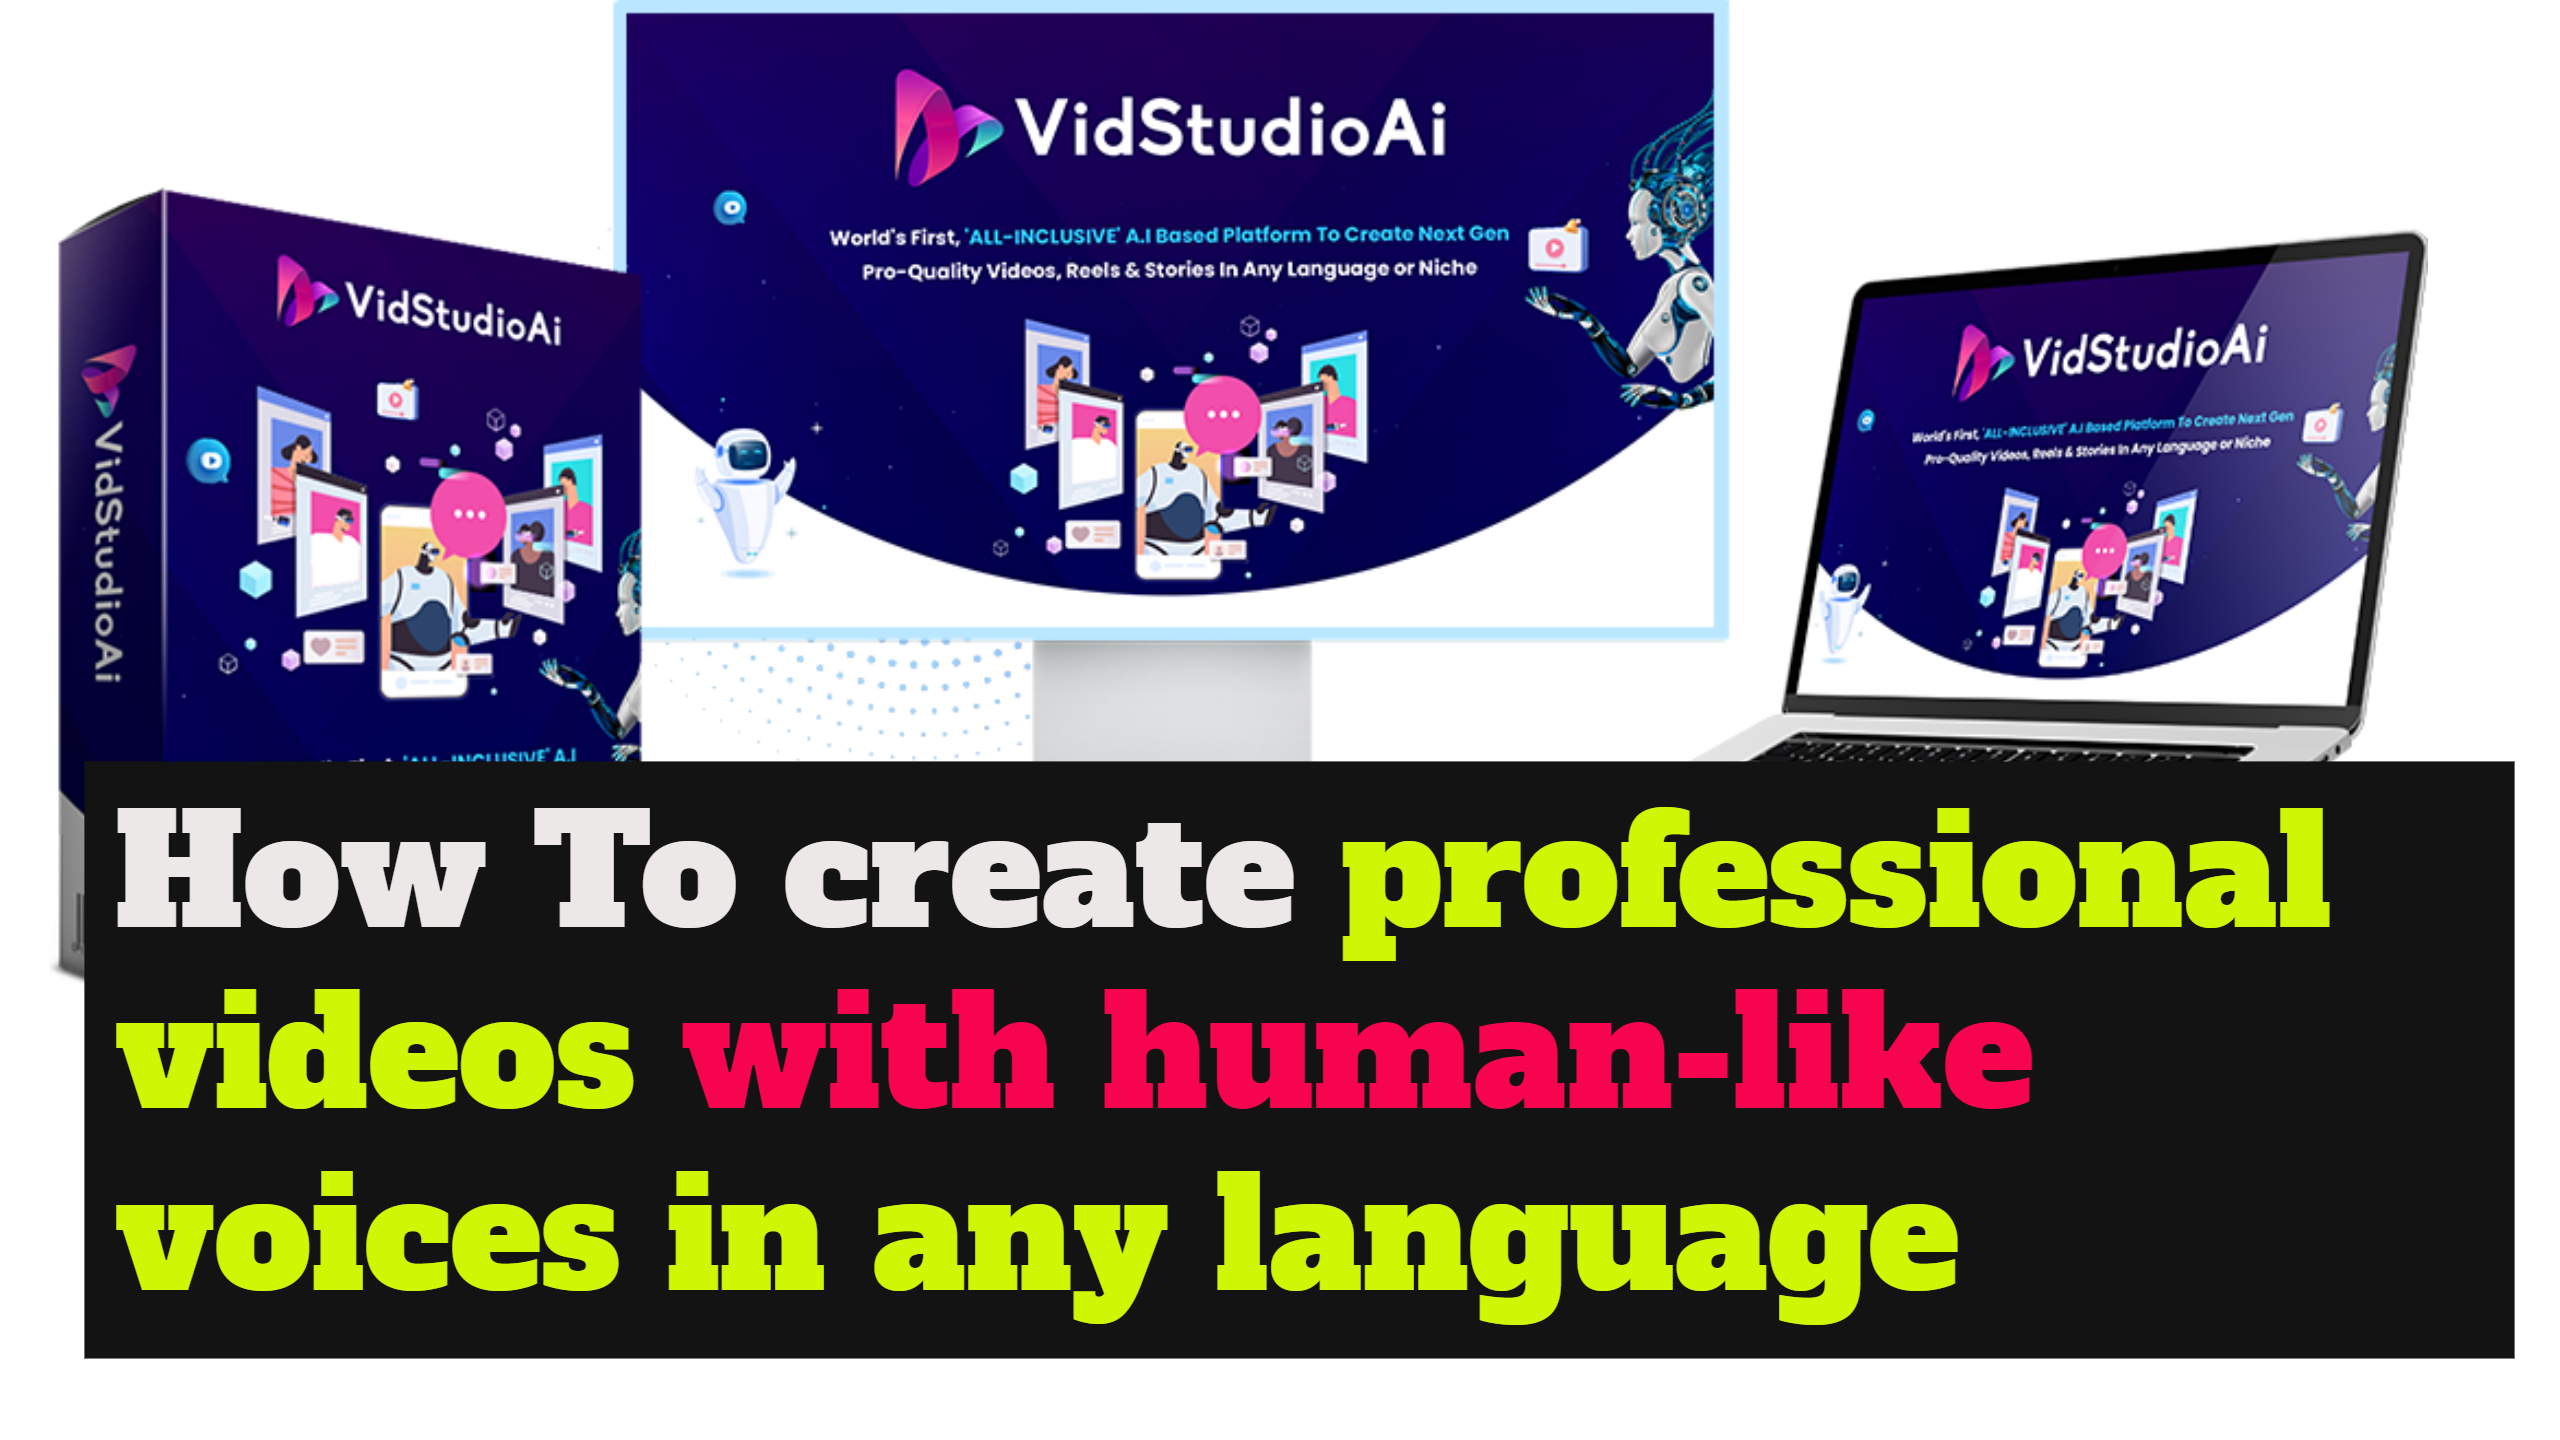 How To create professional videos with human-like voices in any language